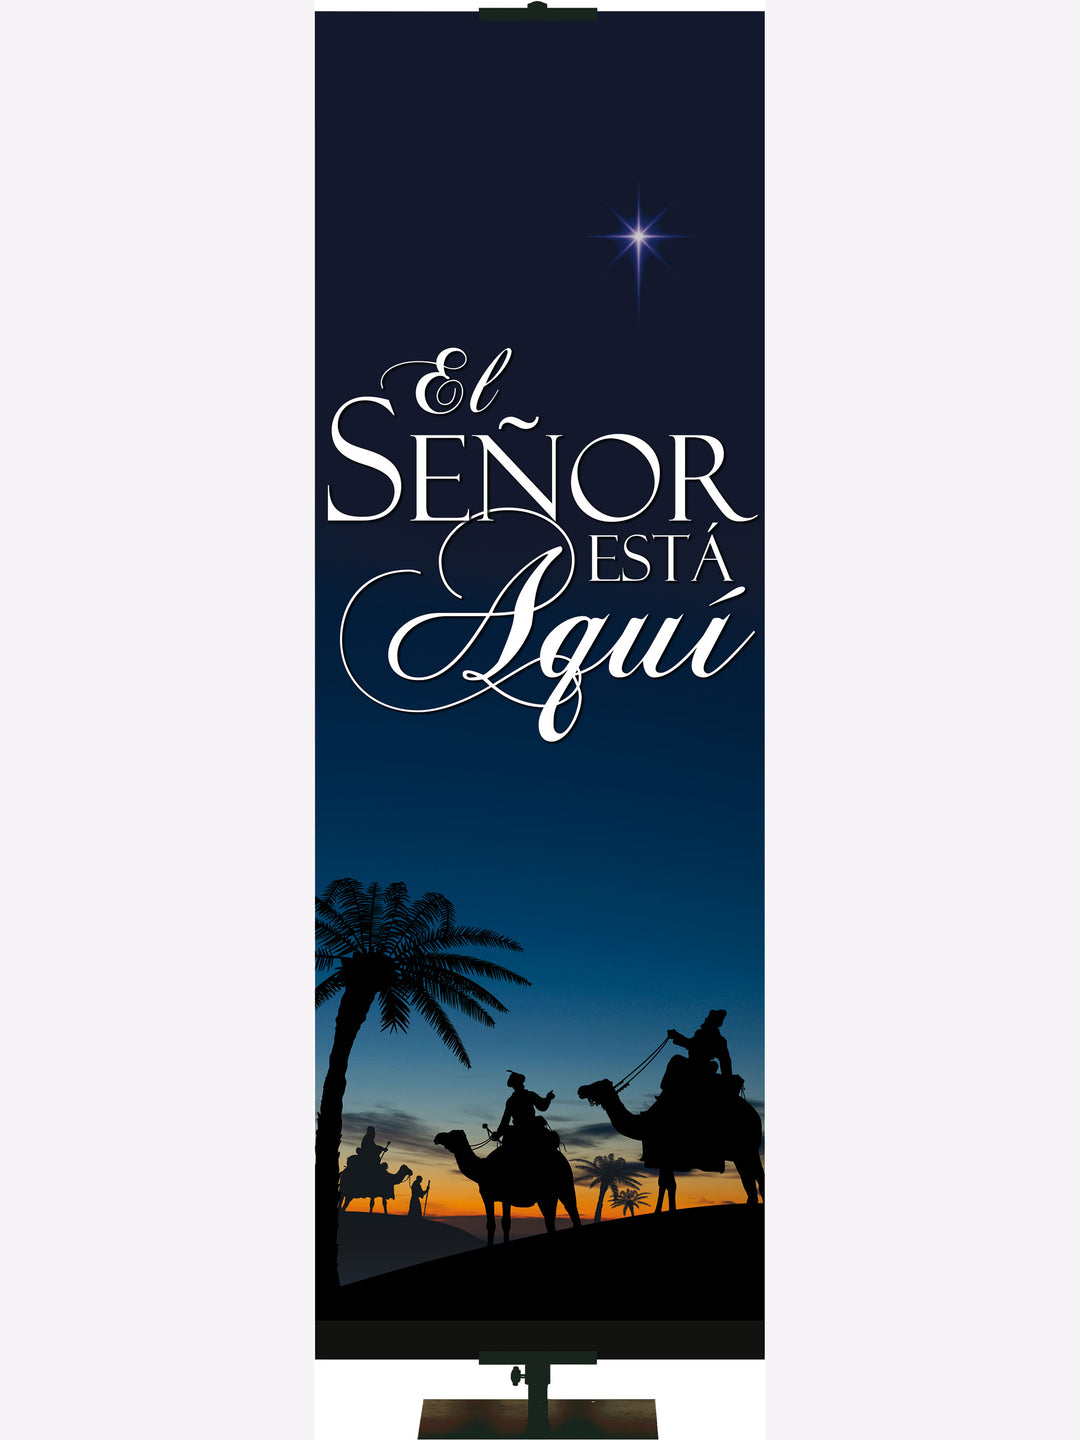 Spanish The Nativity The Lord is Come - Christmas Banners - PraiseBanners